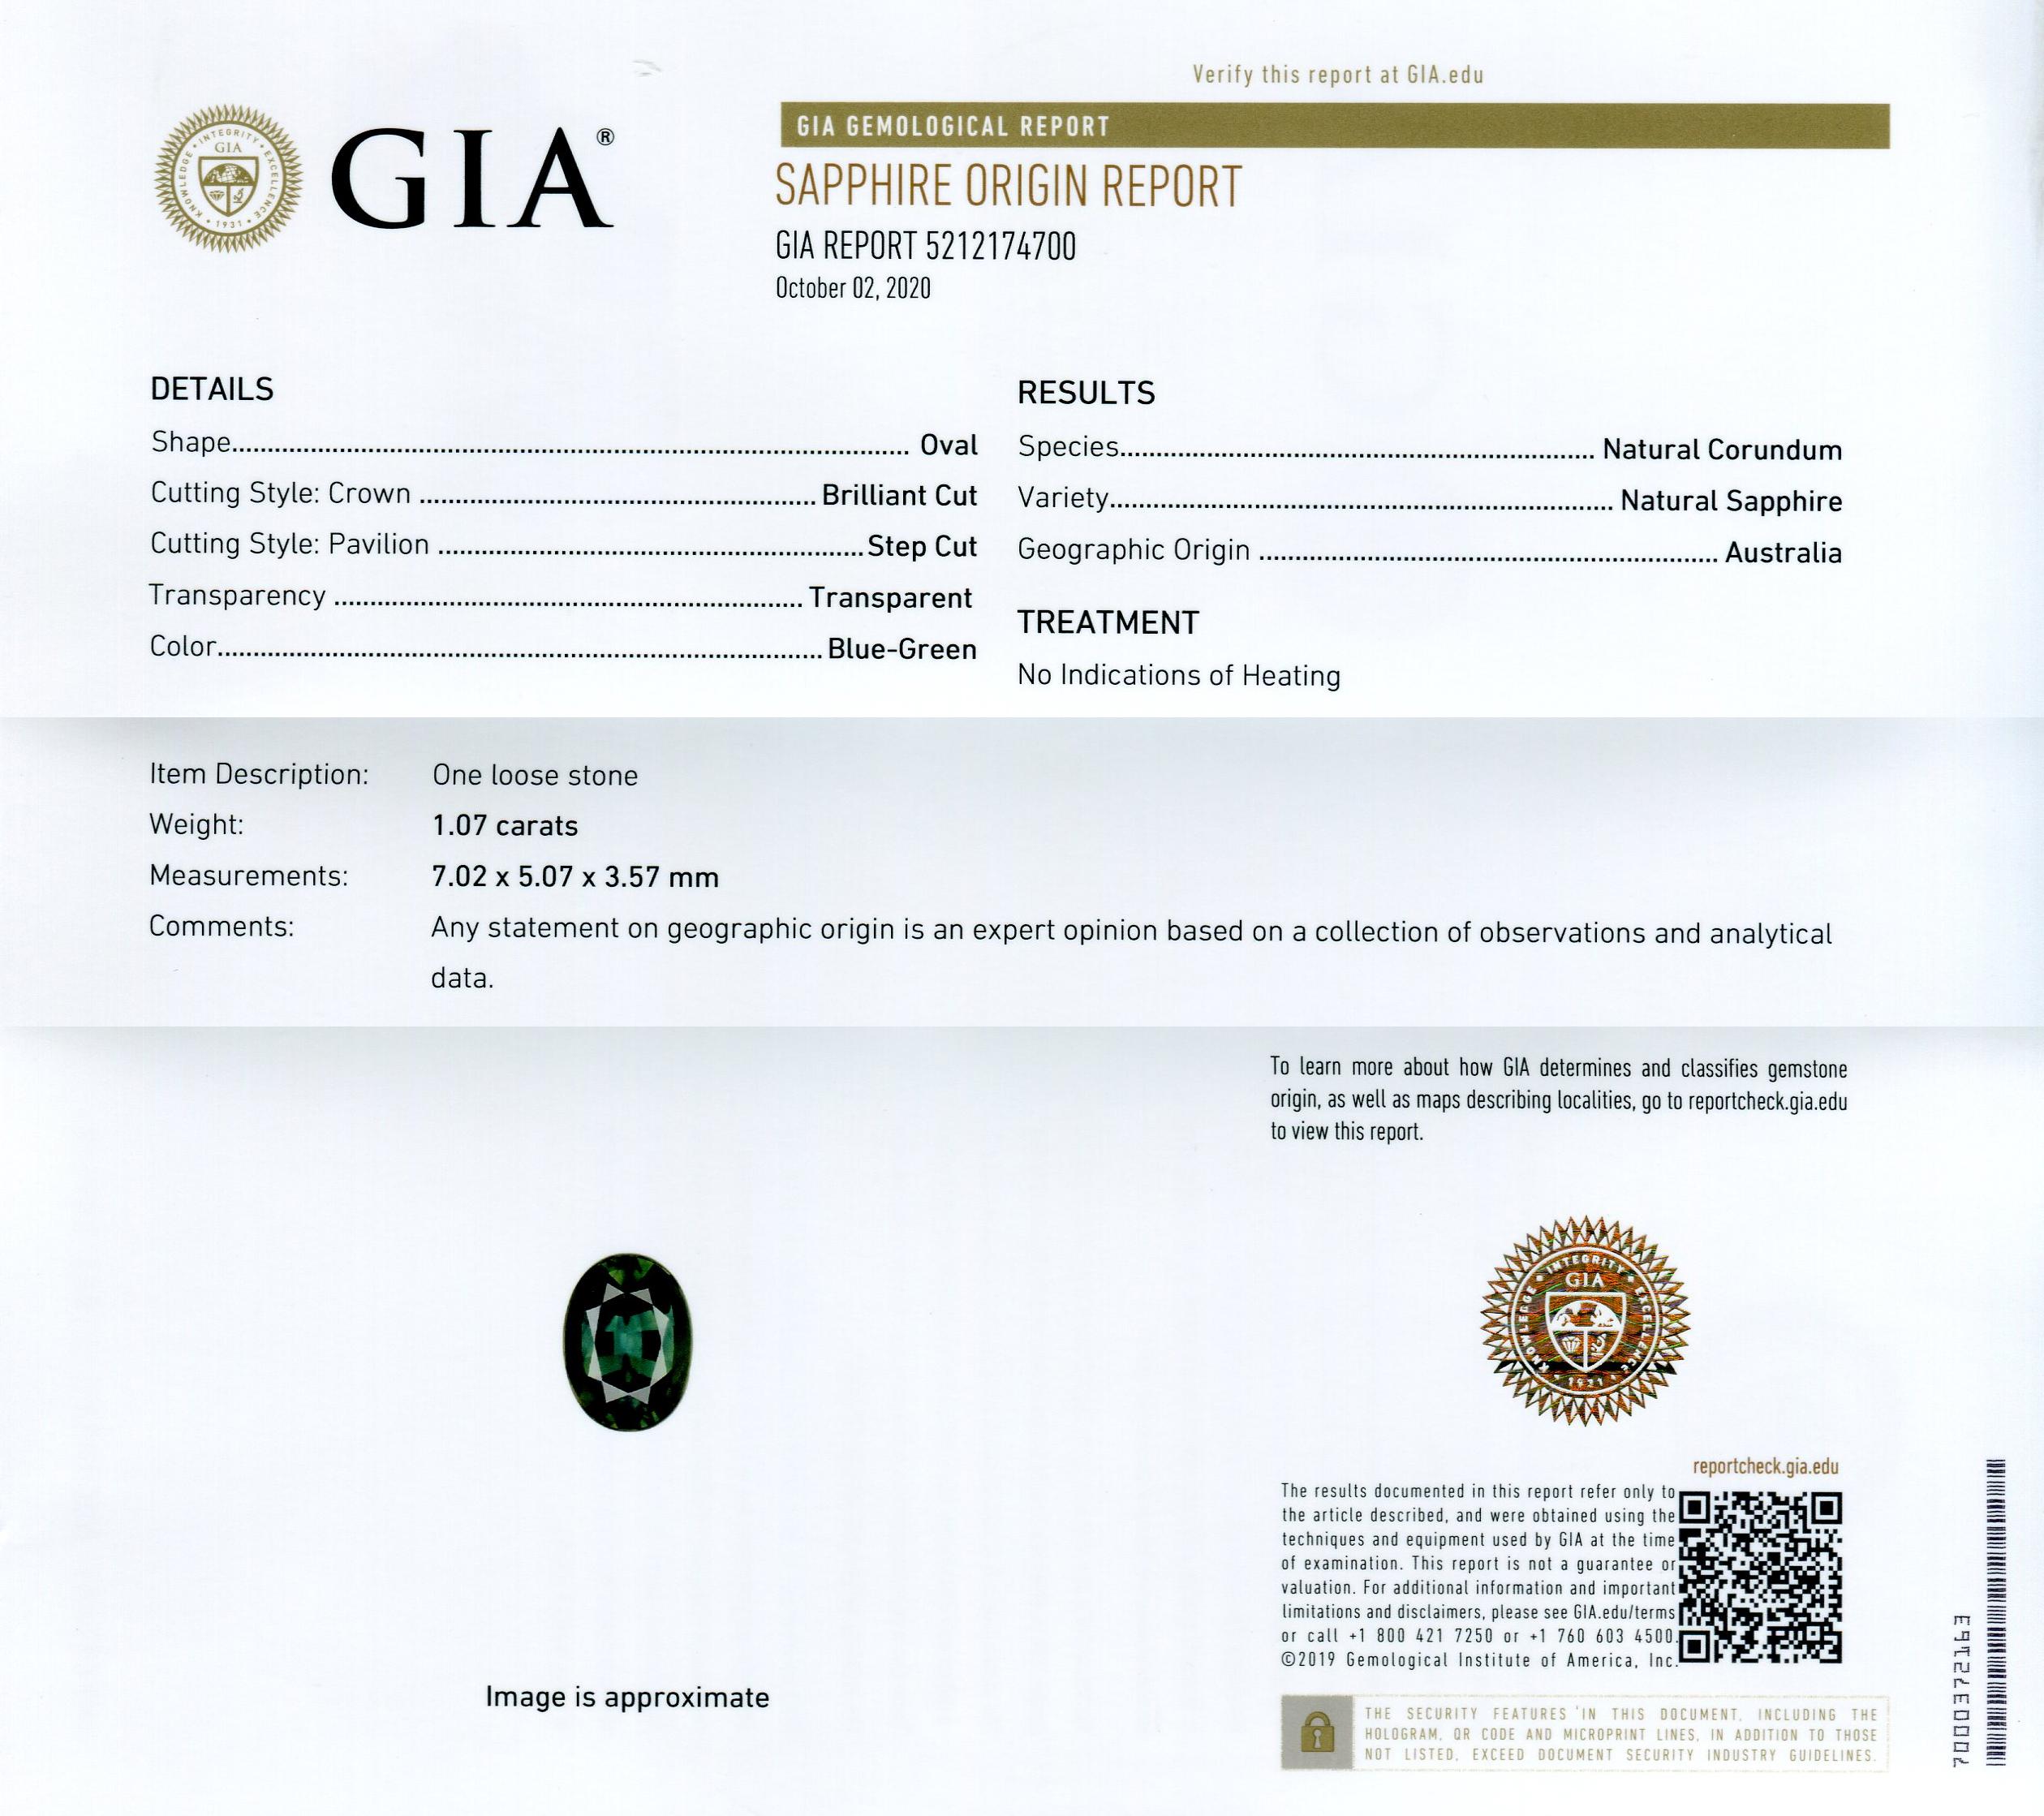 This is a stunning GIA Certified Sapphire 

The GIA report reads as follows:

GIA Report Number: 5212174700
Shape: Oval
Cutting Style: 
Cutting Style: Crown: Brilliant Cut
Cutting Style: Pavilion: Step Cut
Transparency: Transparent
Color: